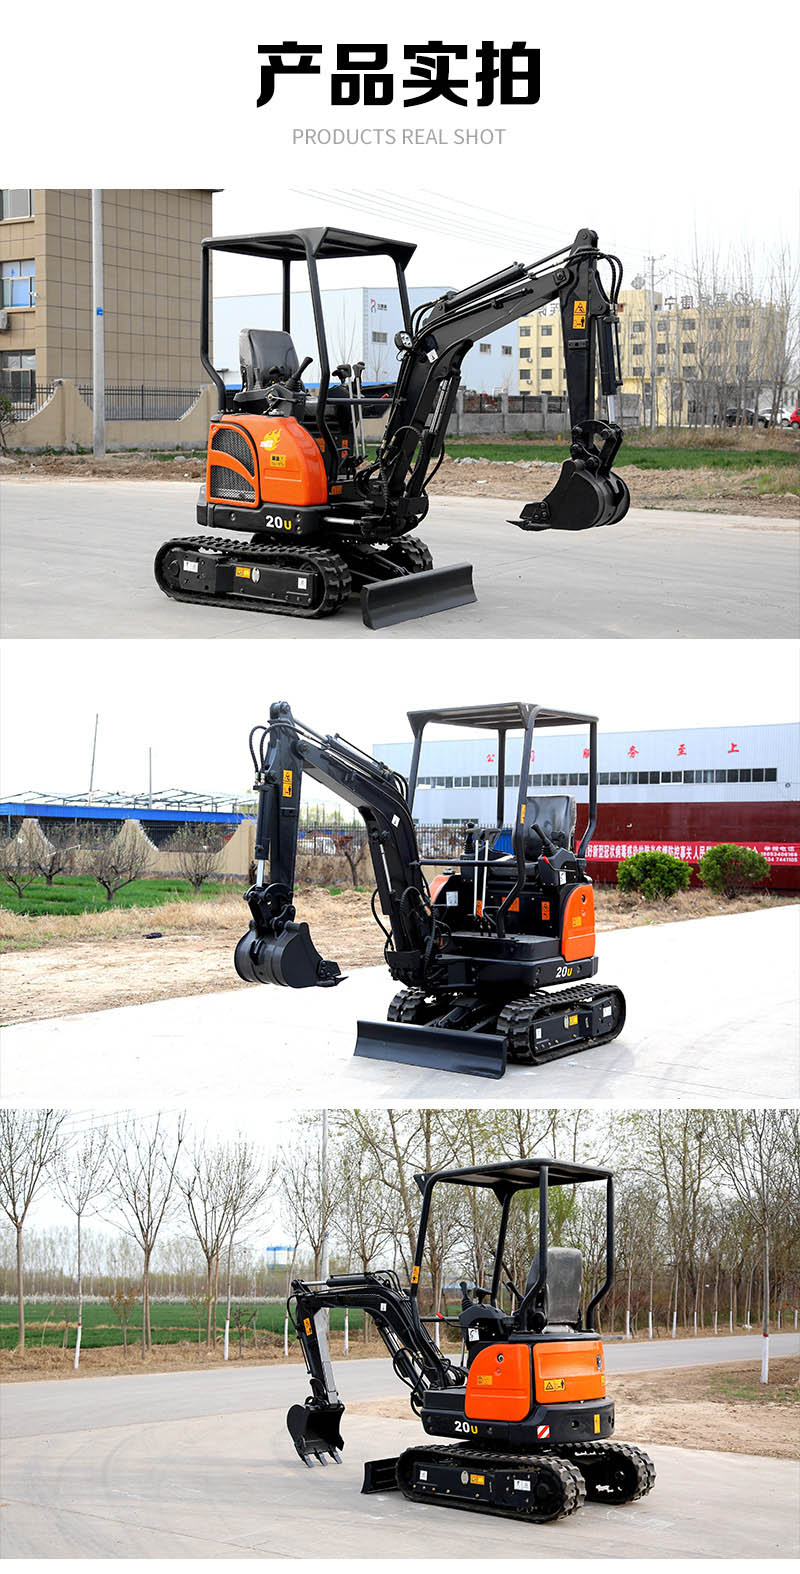 Small excavator and long arm excavator for orchard excavation and tree moving, tracked diesel driven hook machine